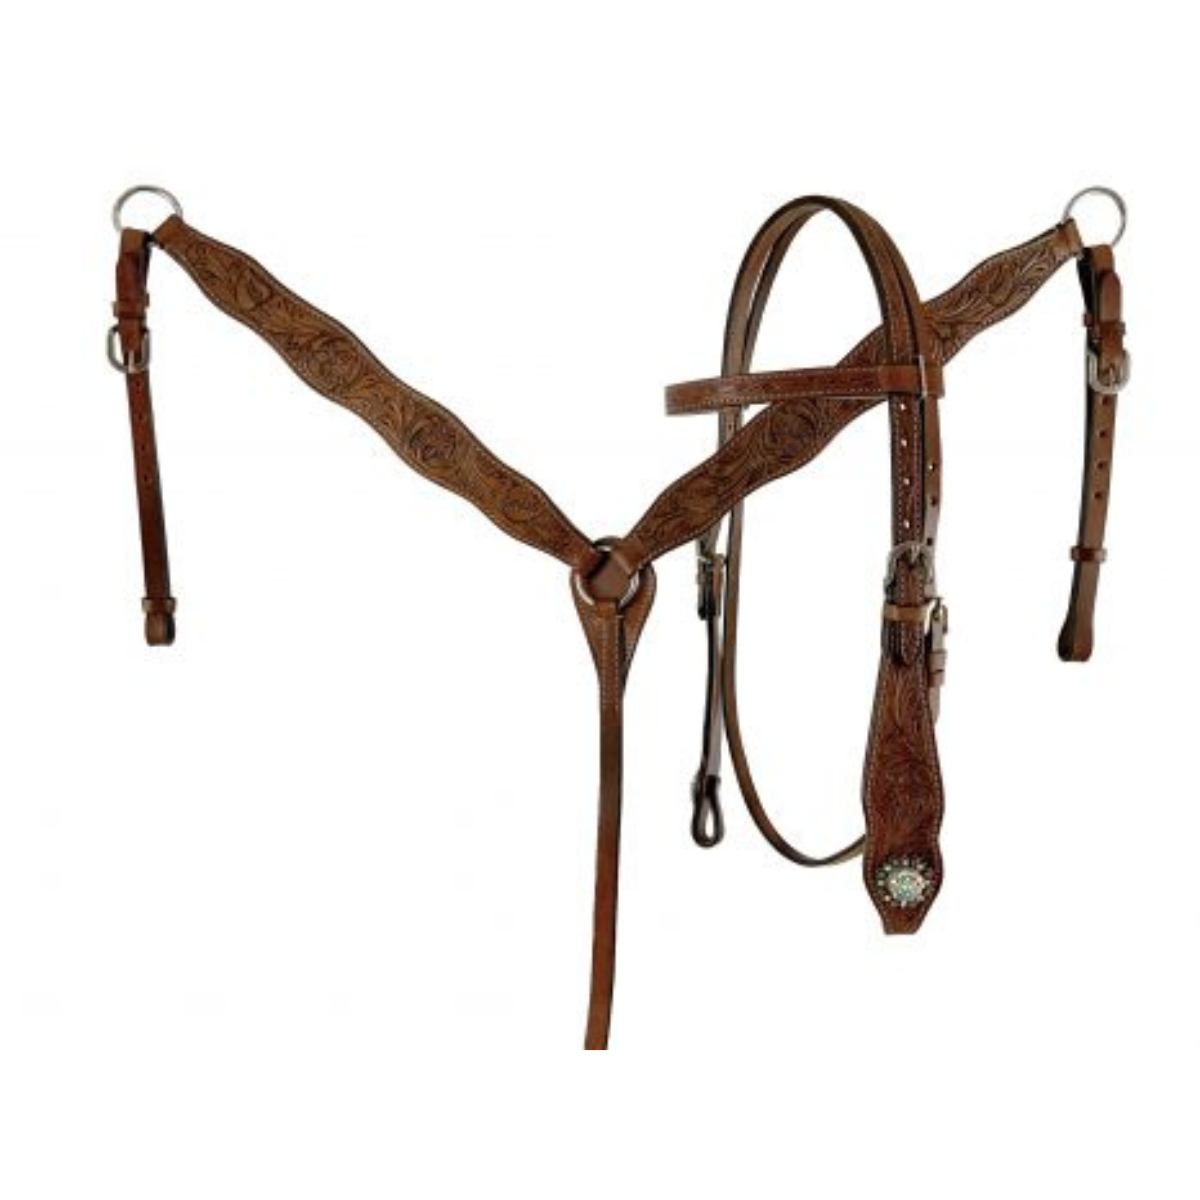 12" DOUBLE T  MEDIUM OIL YOUTH BARREL STYLE SADDLE SET WITH SUEDE SEAT - Double T Saddles